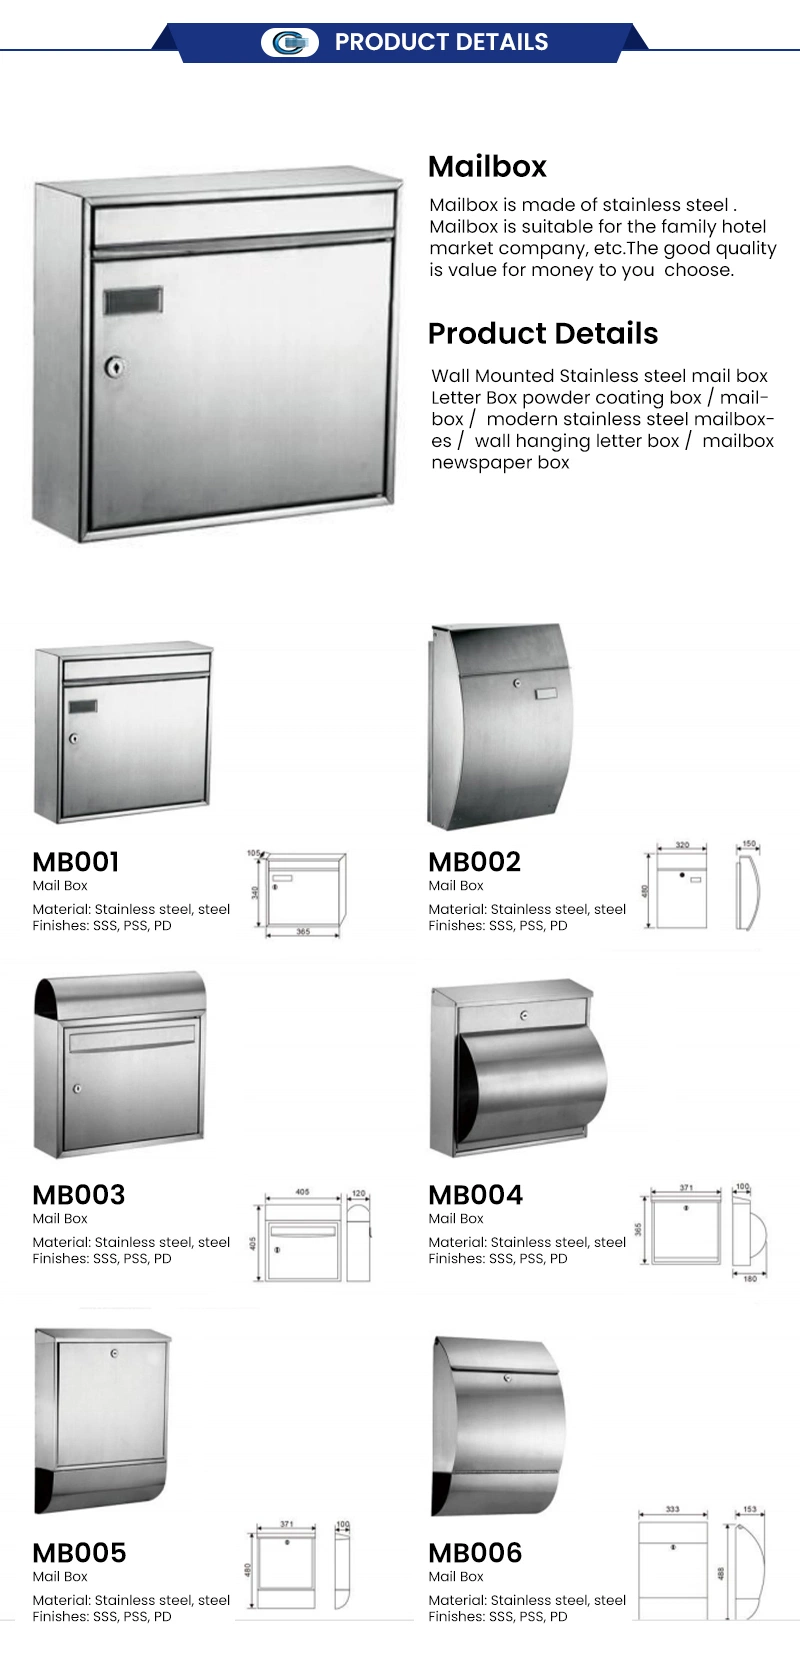 Huasheng Wall Mounted Mailbox Stainless Steel Mailbox Locking Key Mailbox Letter Modern Postbox Silver Home Outdoor Parcel Box